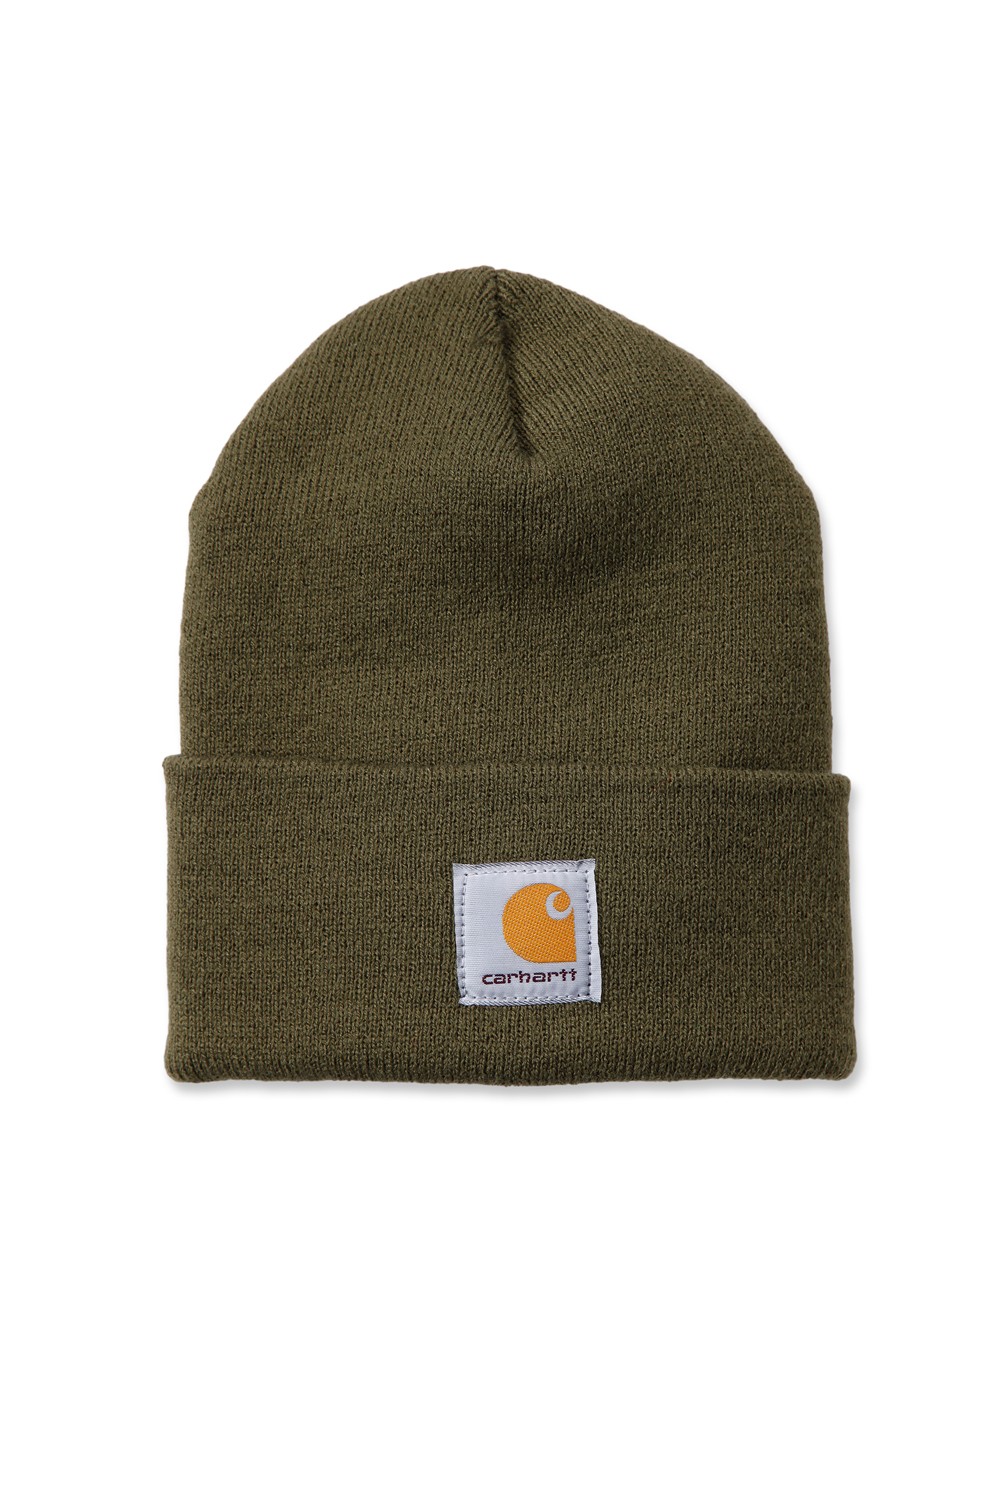 Carhartt Classic Watch Hat-Army Green-One Size